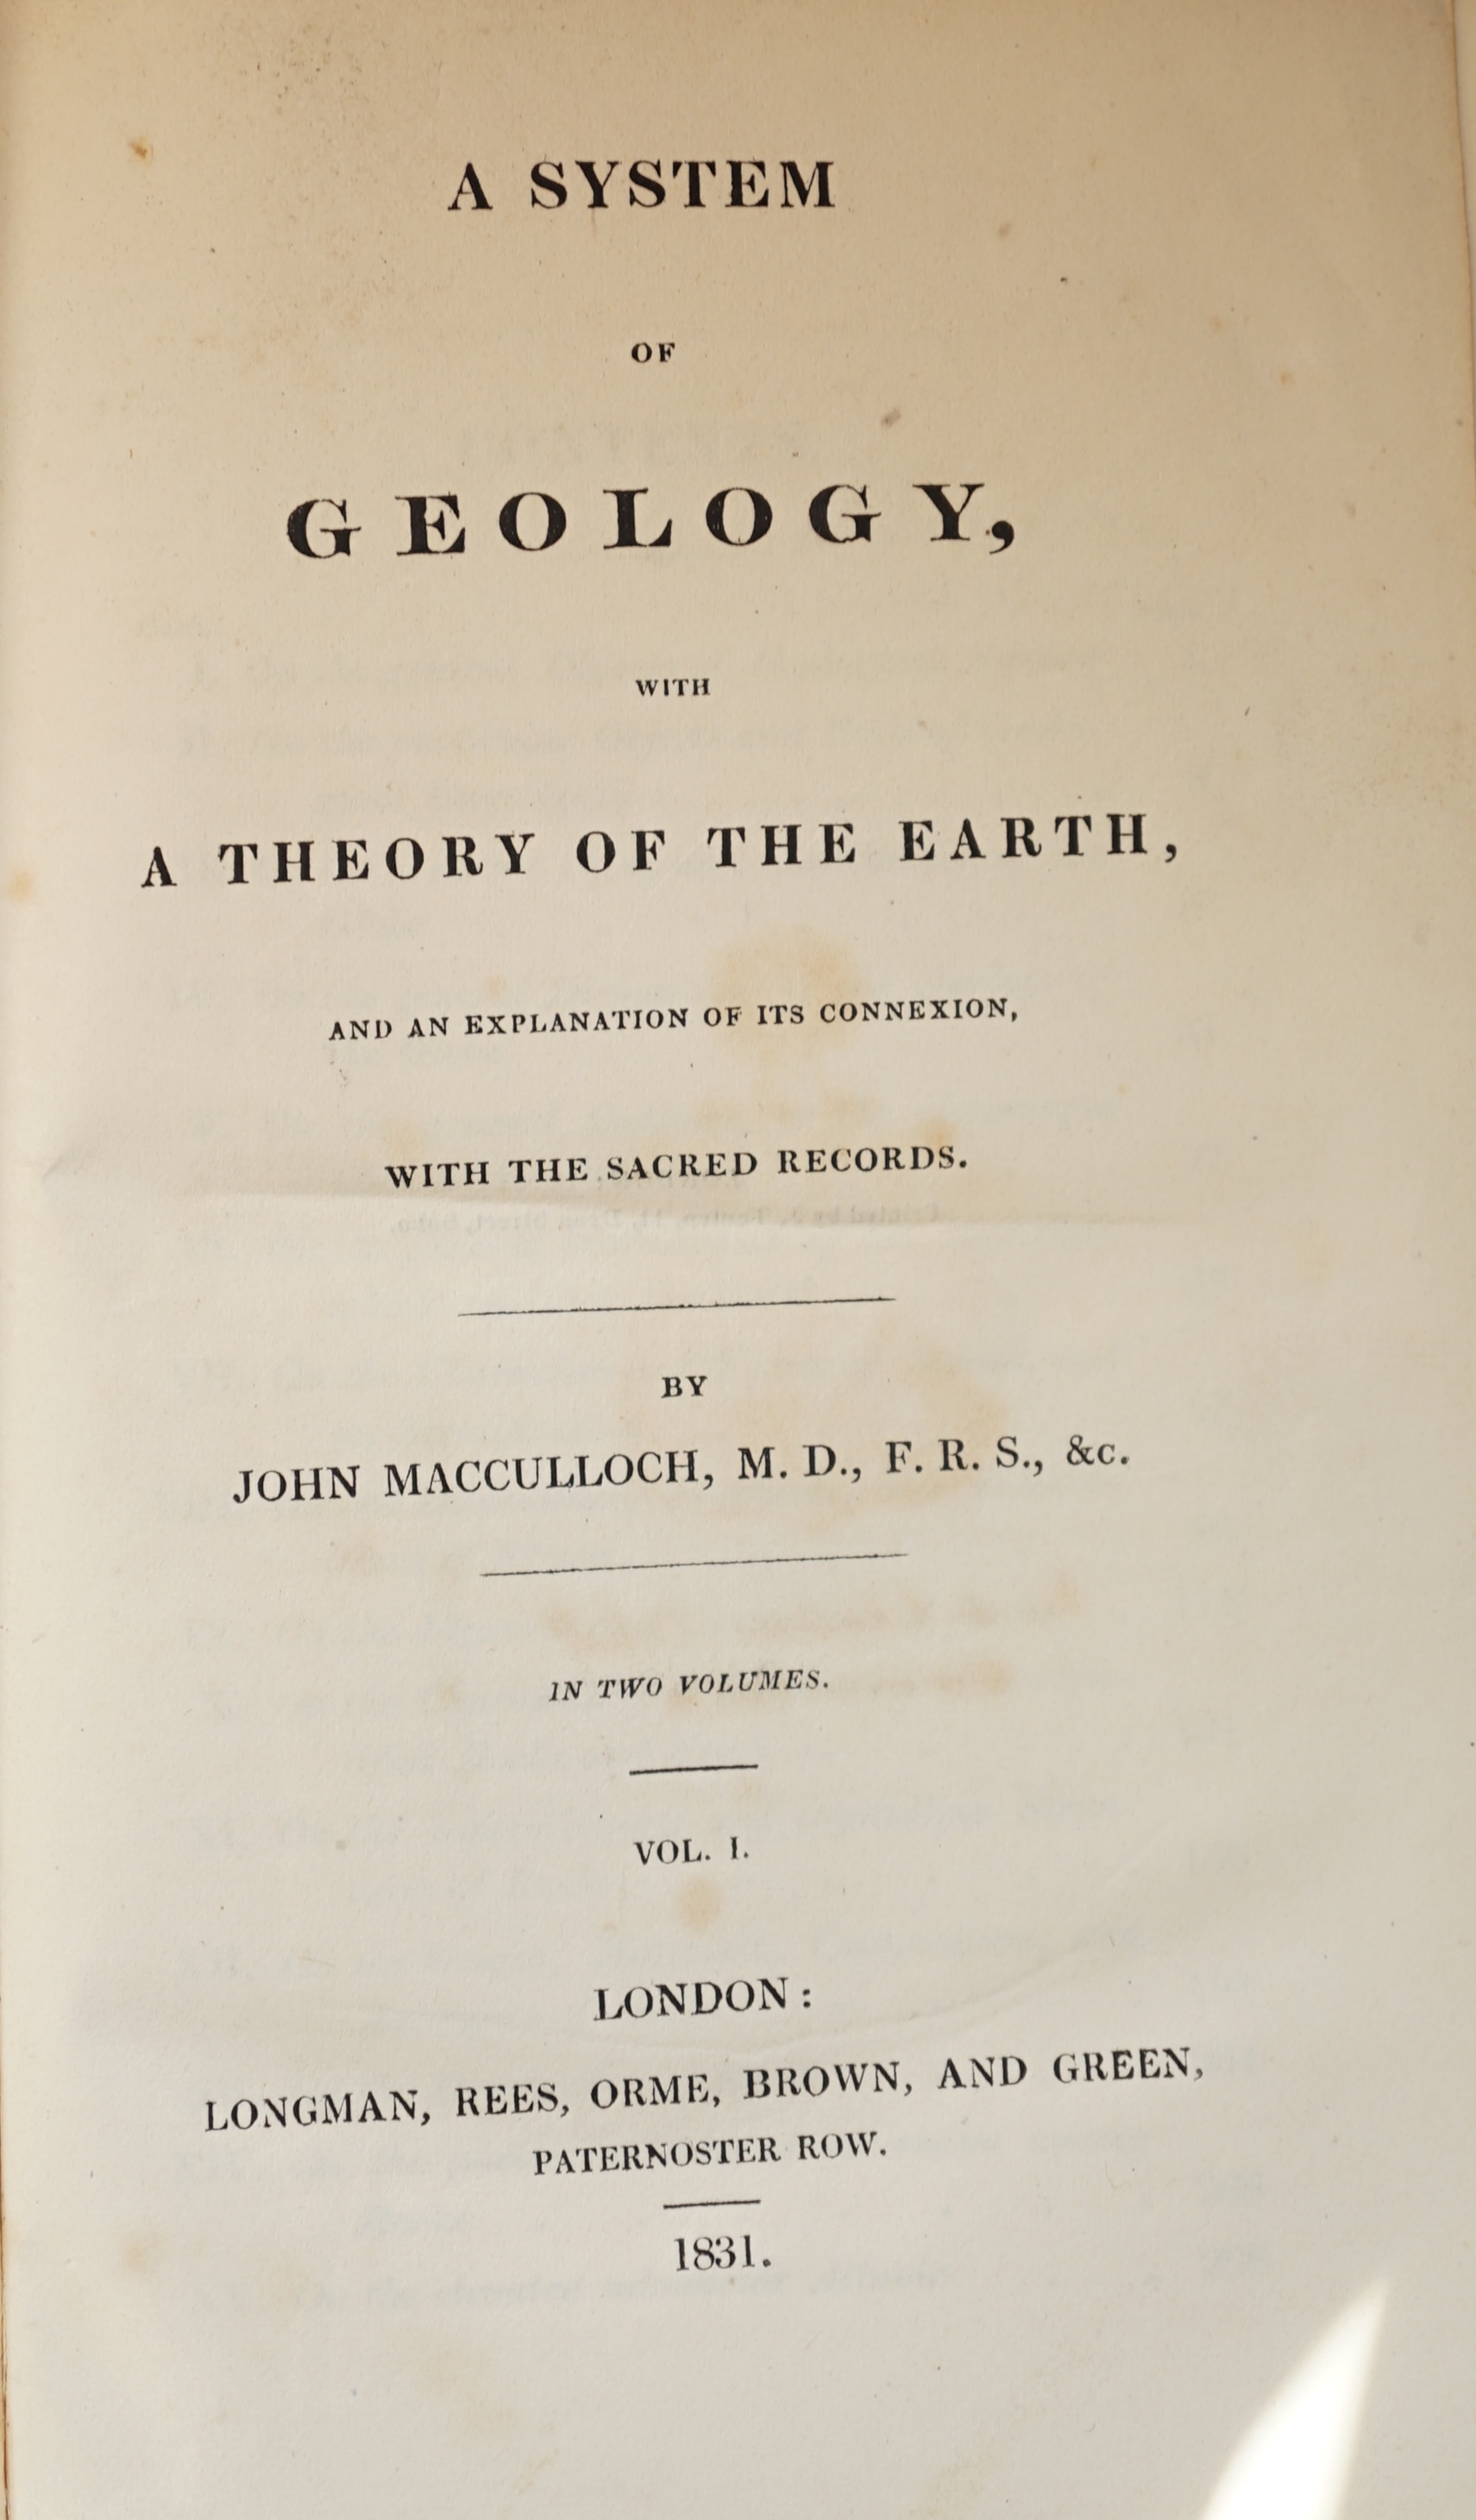 Macculoch, James - A System of Geology, with a Theory of the Earth, 1st edition, 2 vols, 8vo, cloth, stained with spine detached to vol. 1, Longman, Rees, Orme, Brown and Green, London, 1831.